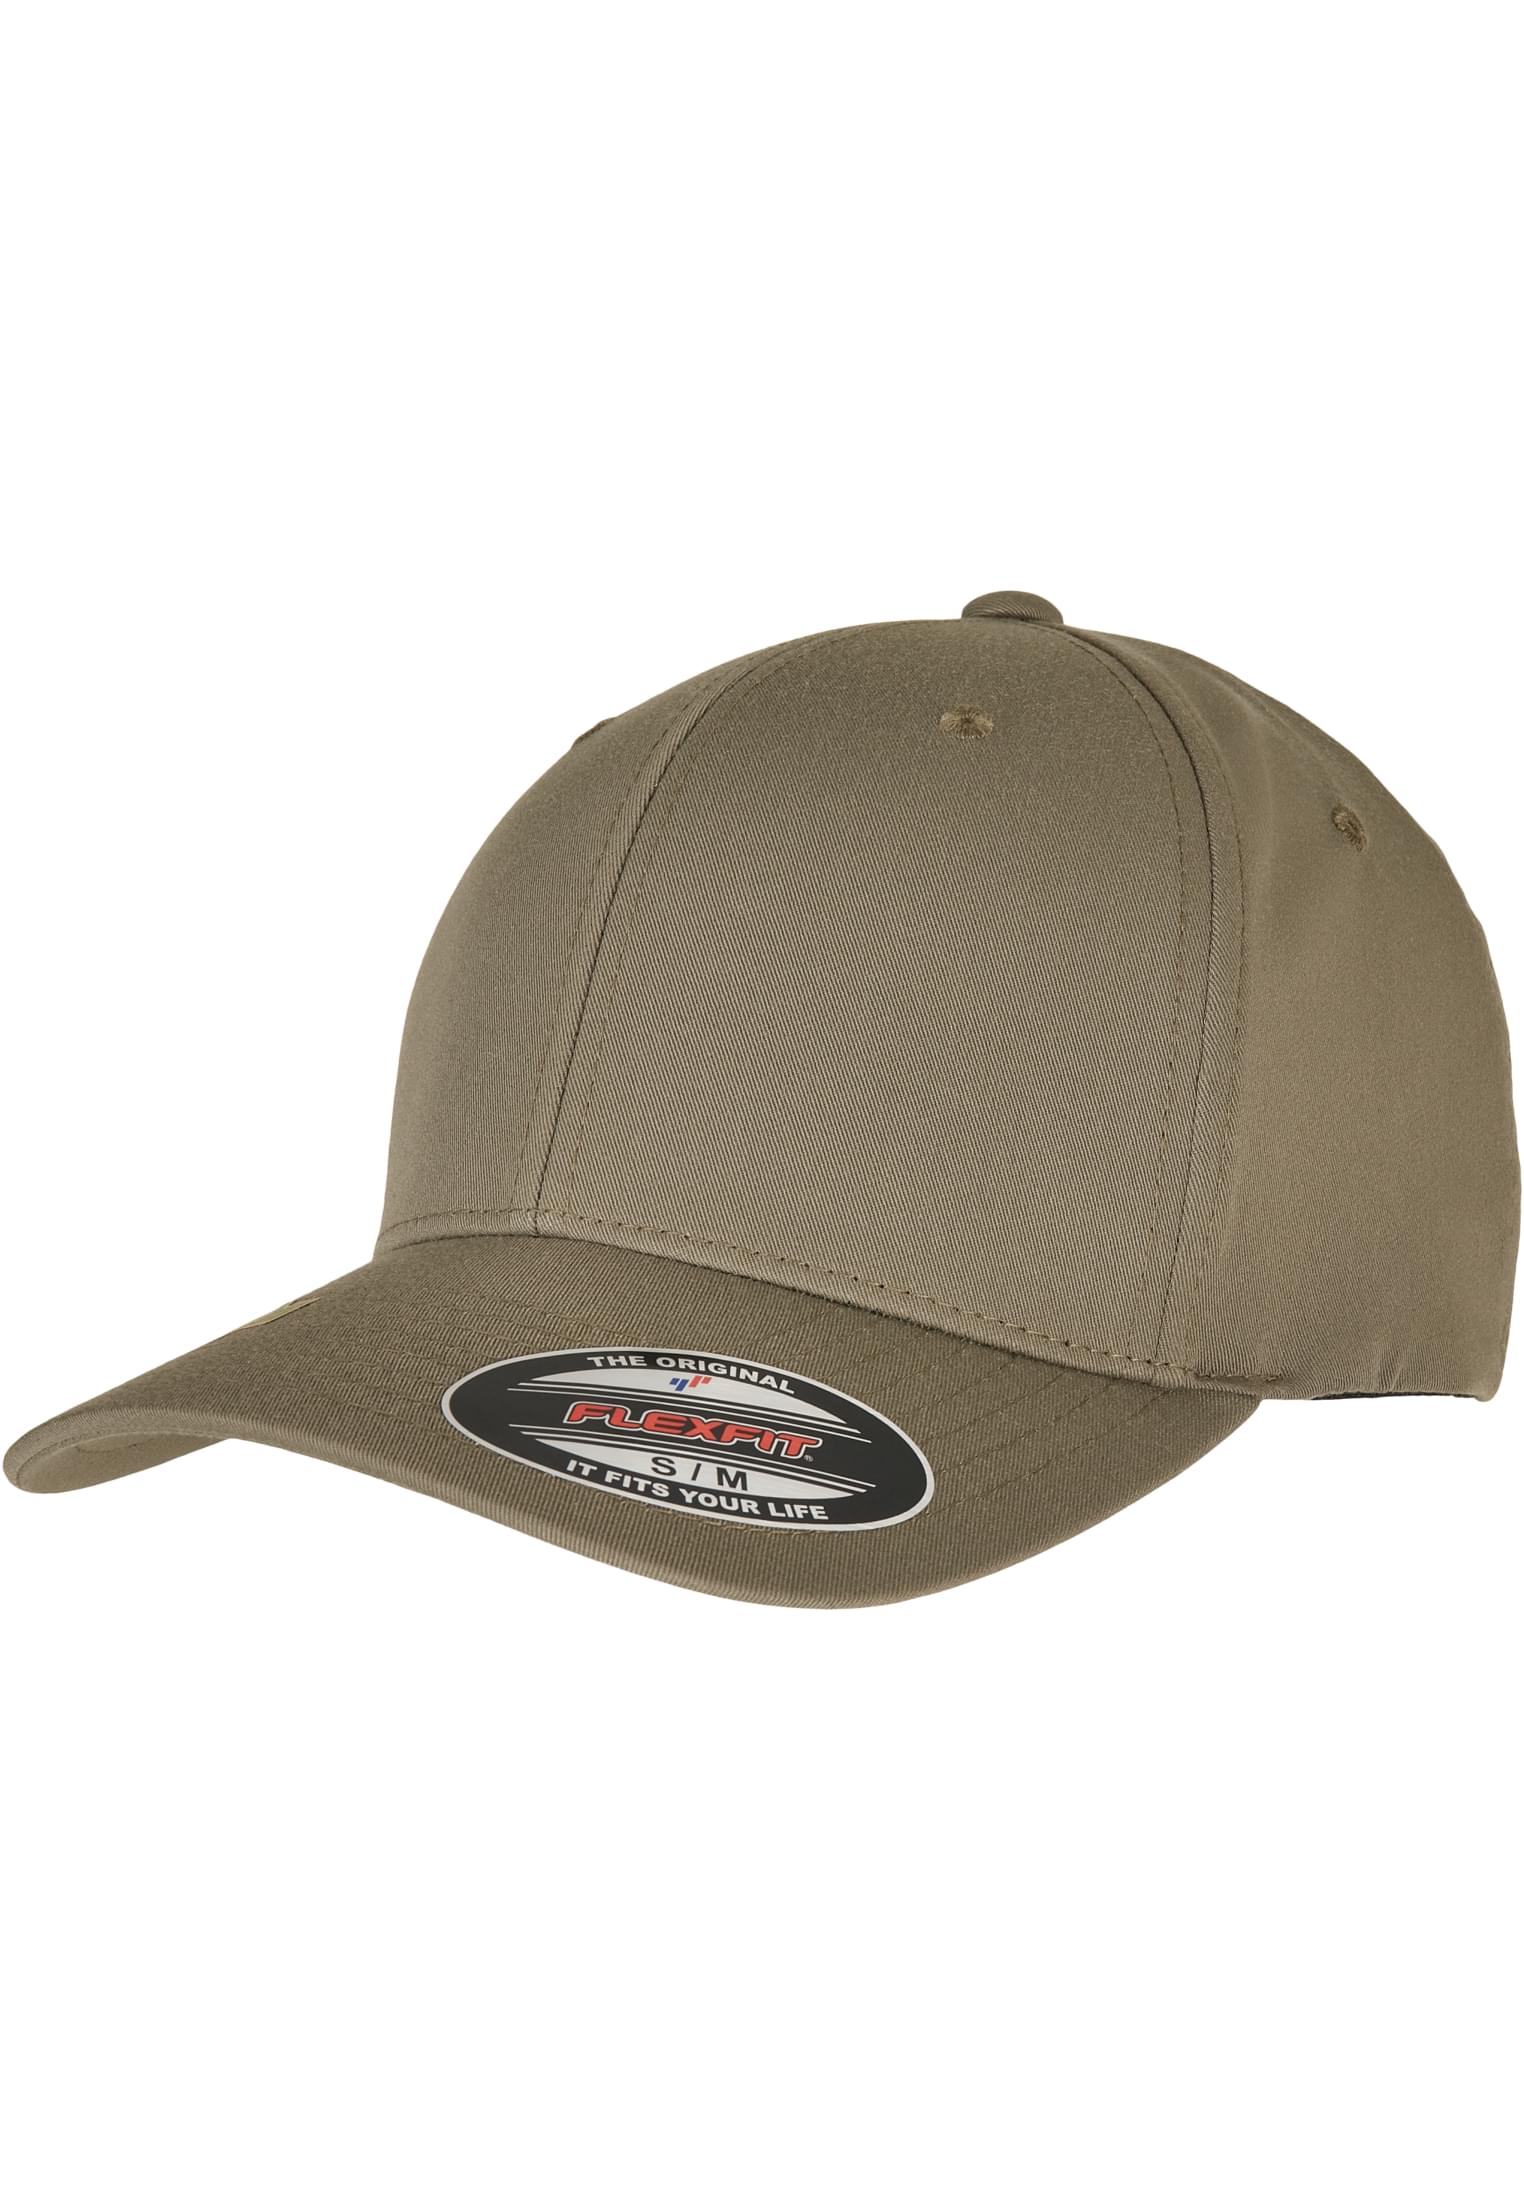 Recycled Cap-6277RP Flexfit Polyester